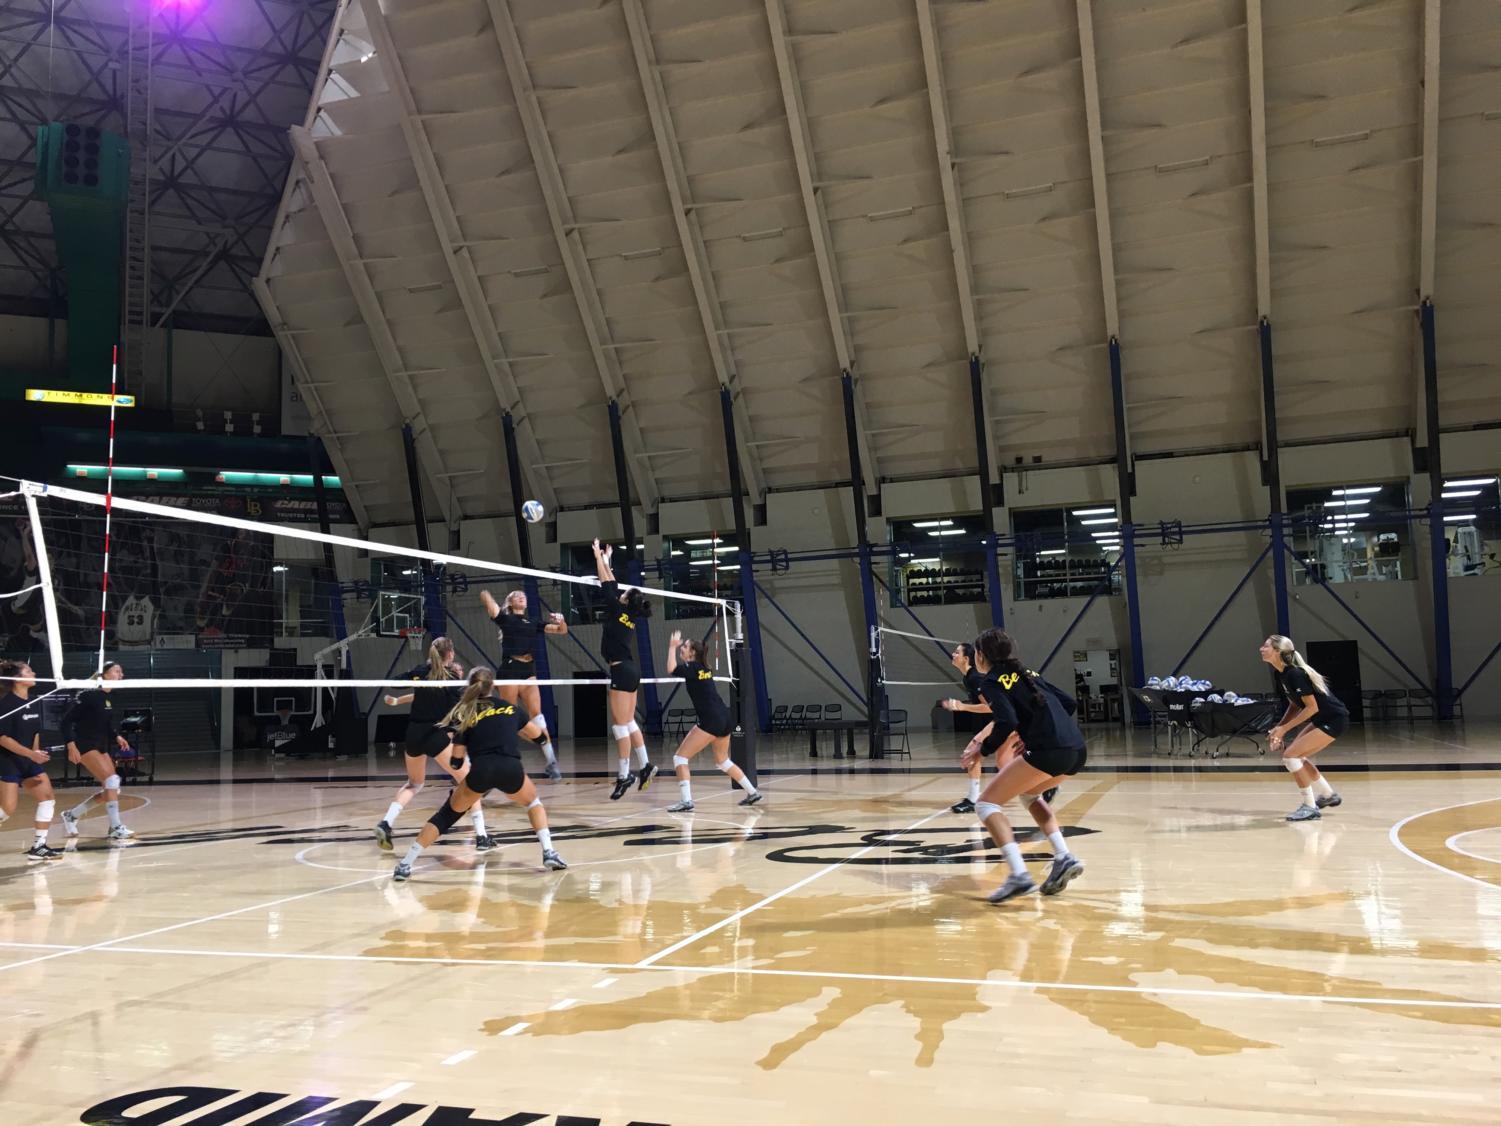 The women's volleyball team scrimmages before its Big West Conference match against UC Davis.